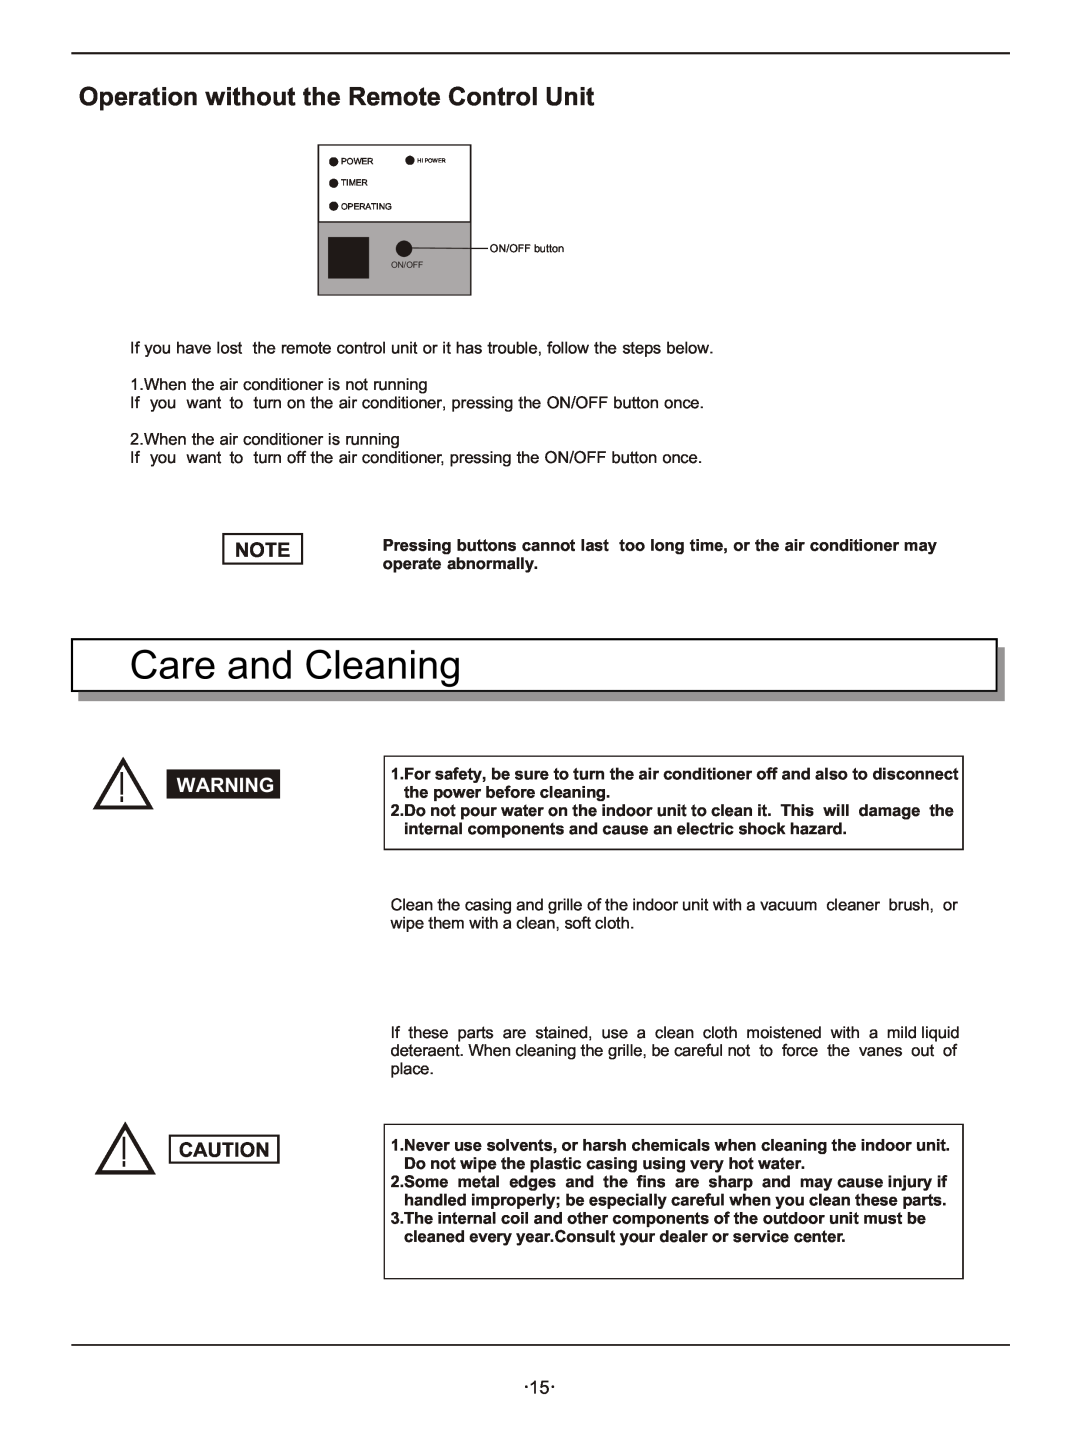 Hisense Group KFR-3208GW instruction manual Care and Cleaning, Operation without the Remote Control Unit 